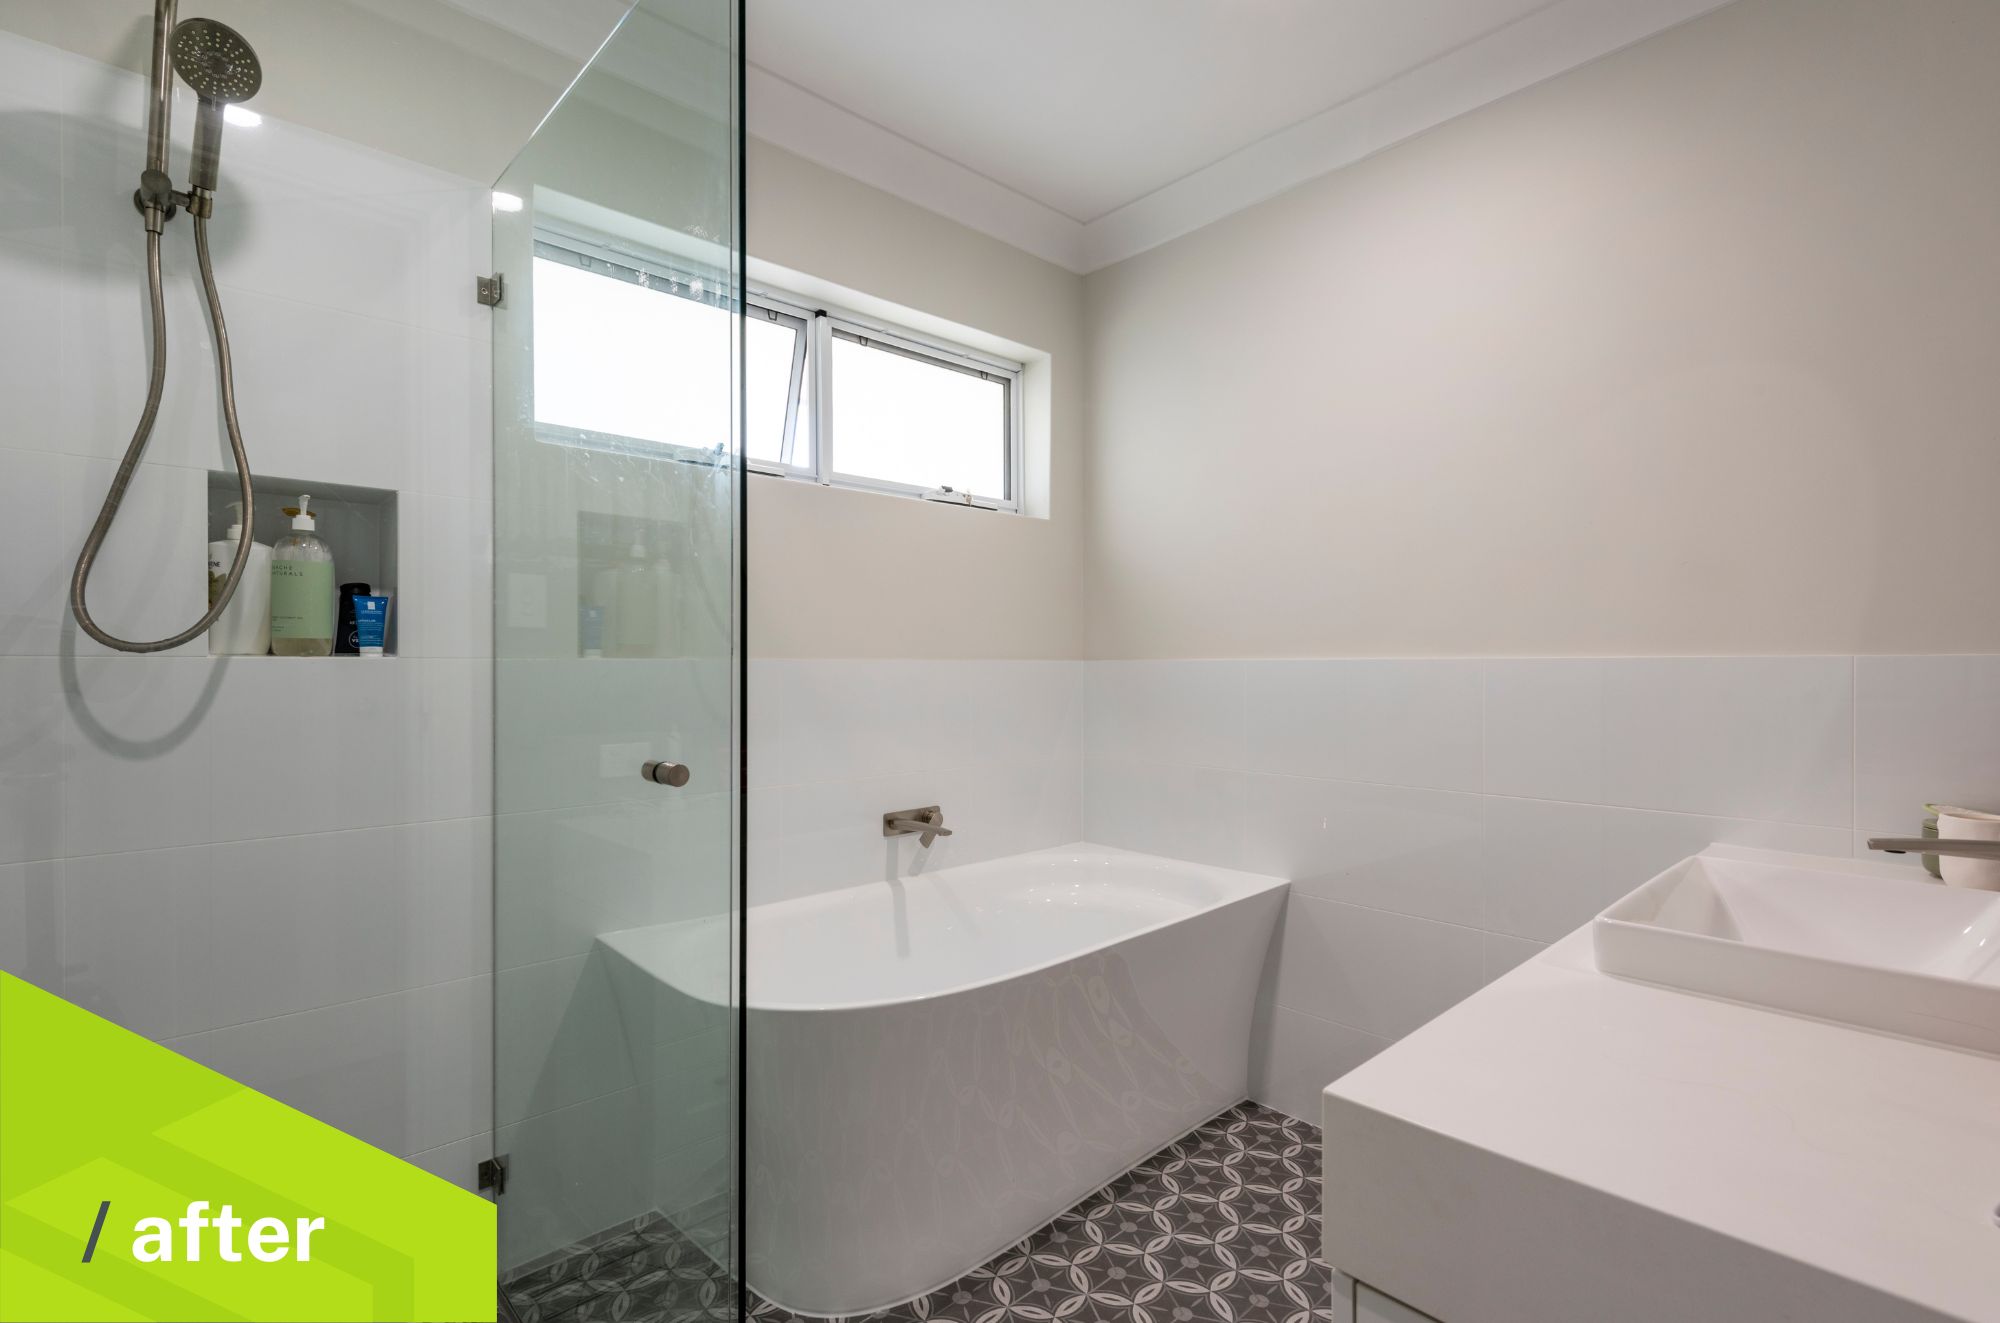 duncraig home renovation before and after pics by amerex renovations (8)